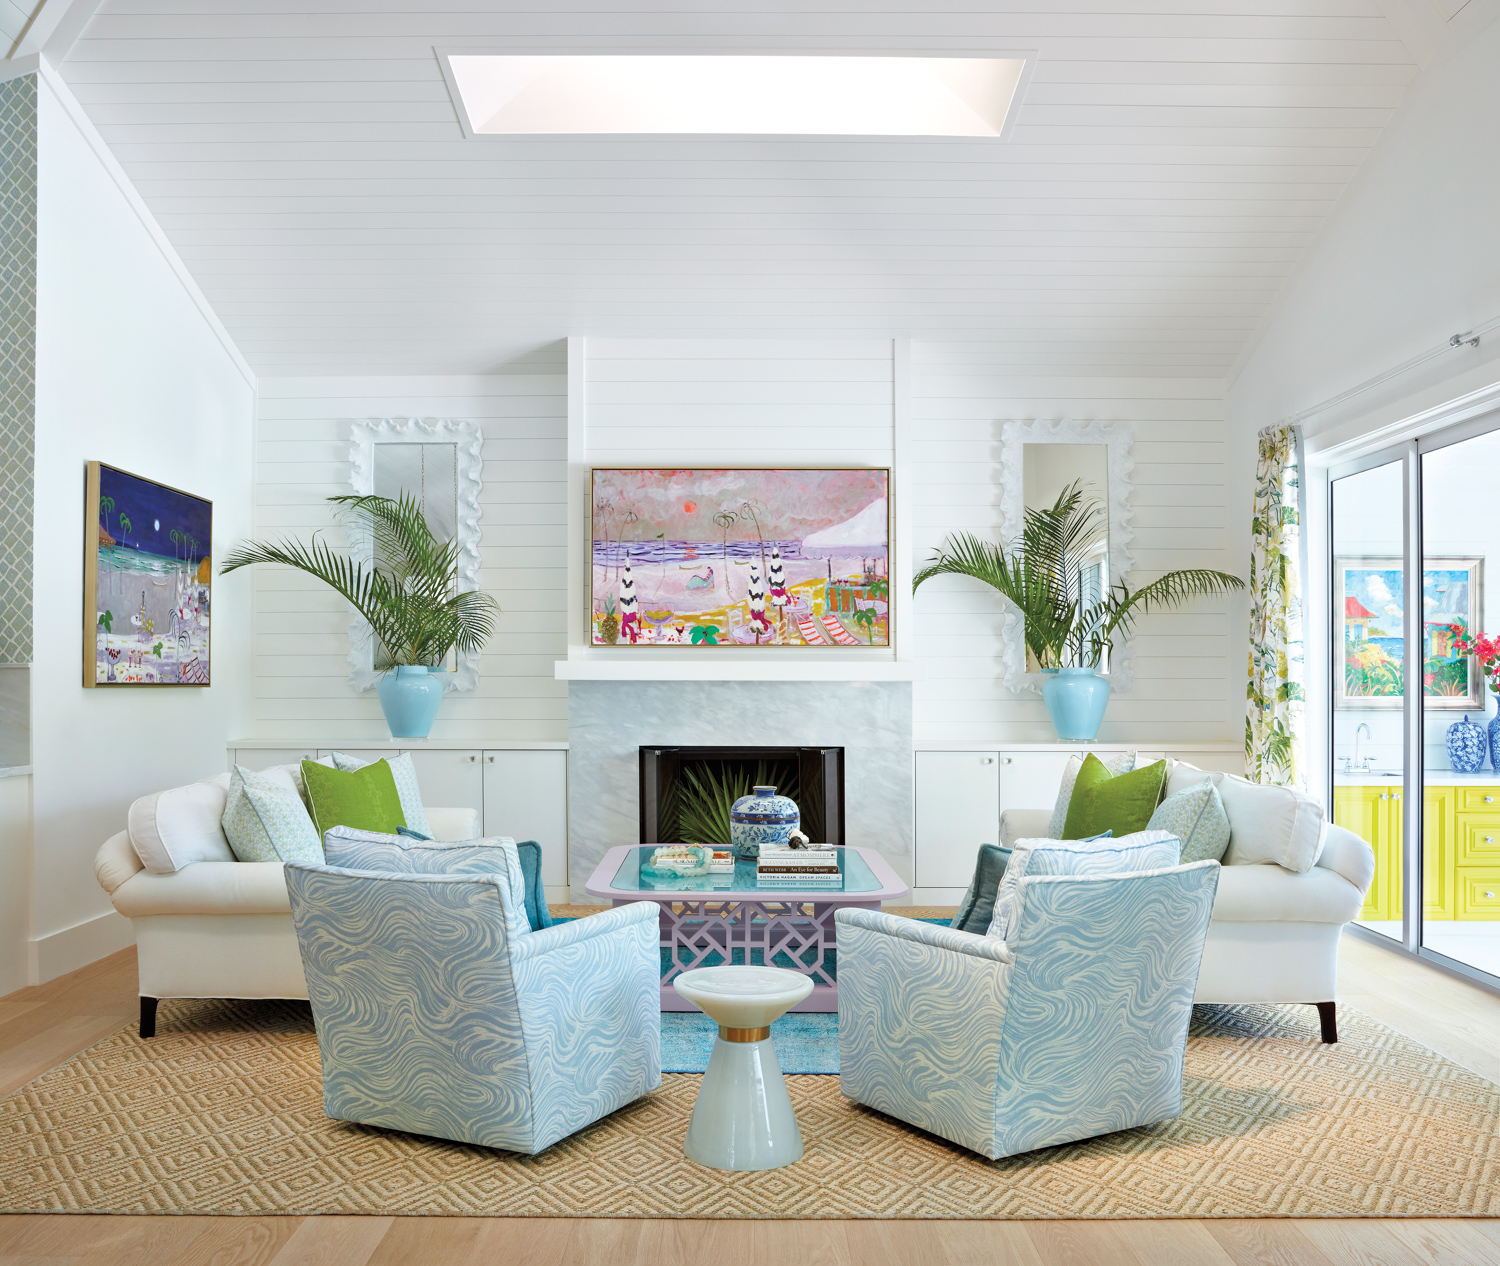 living area with blue print armchairs, colorful art, white walls and fireplace